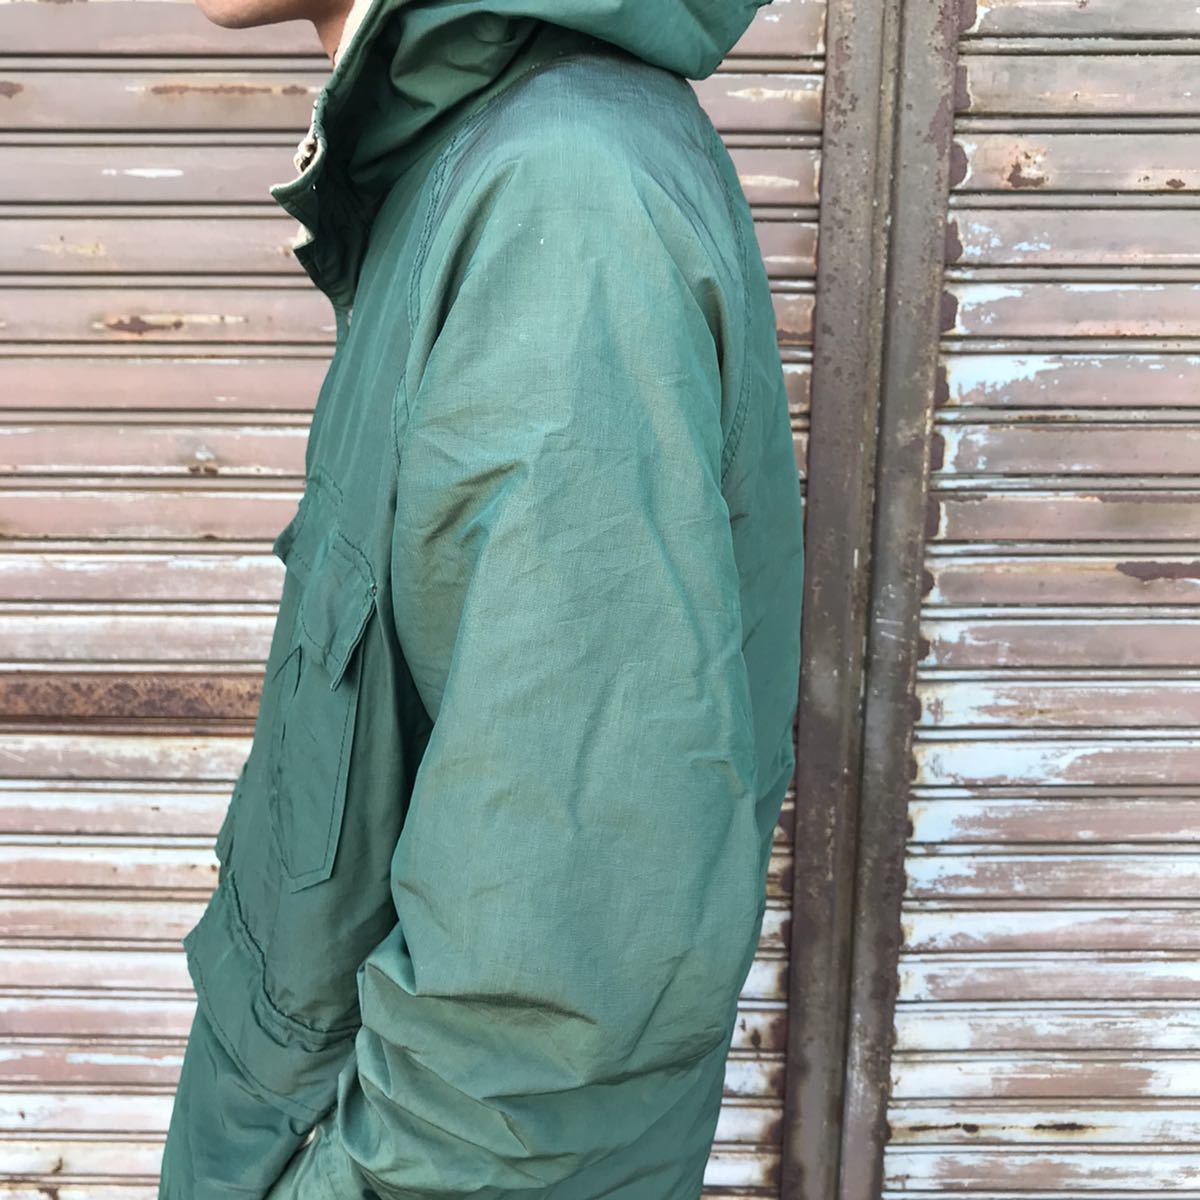 80s USA製 vintage woolrich ウールリッチ ヴィンテージ マウンテン